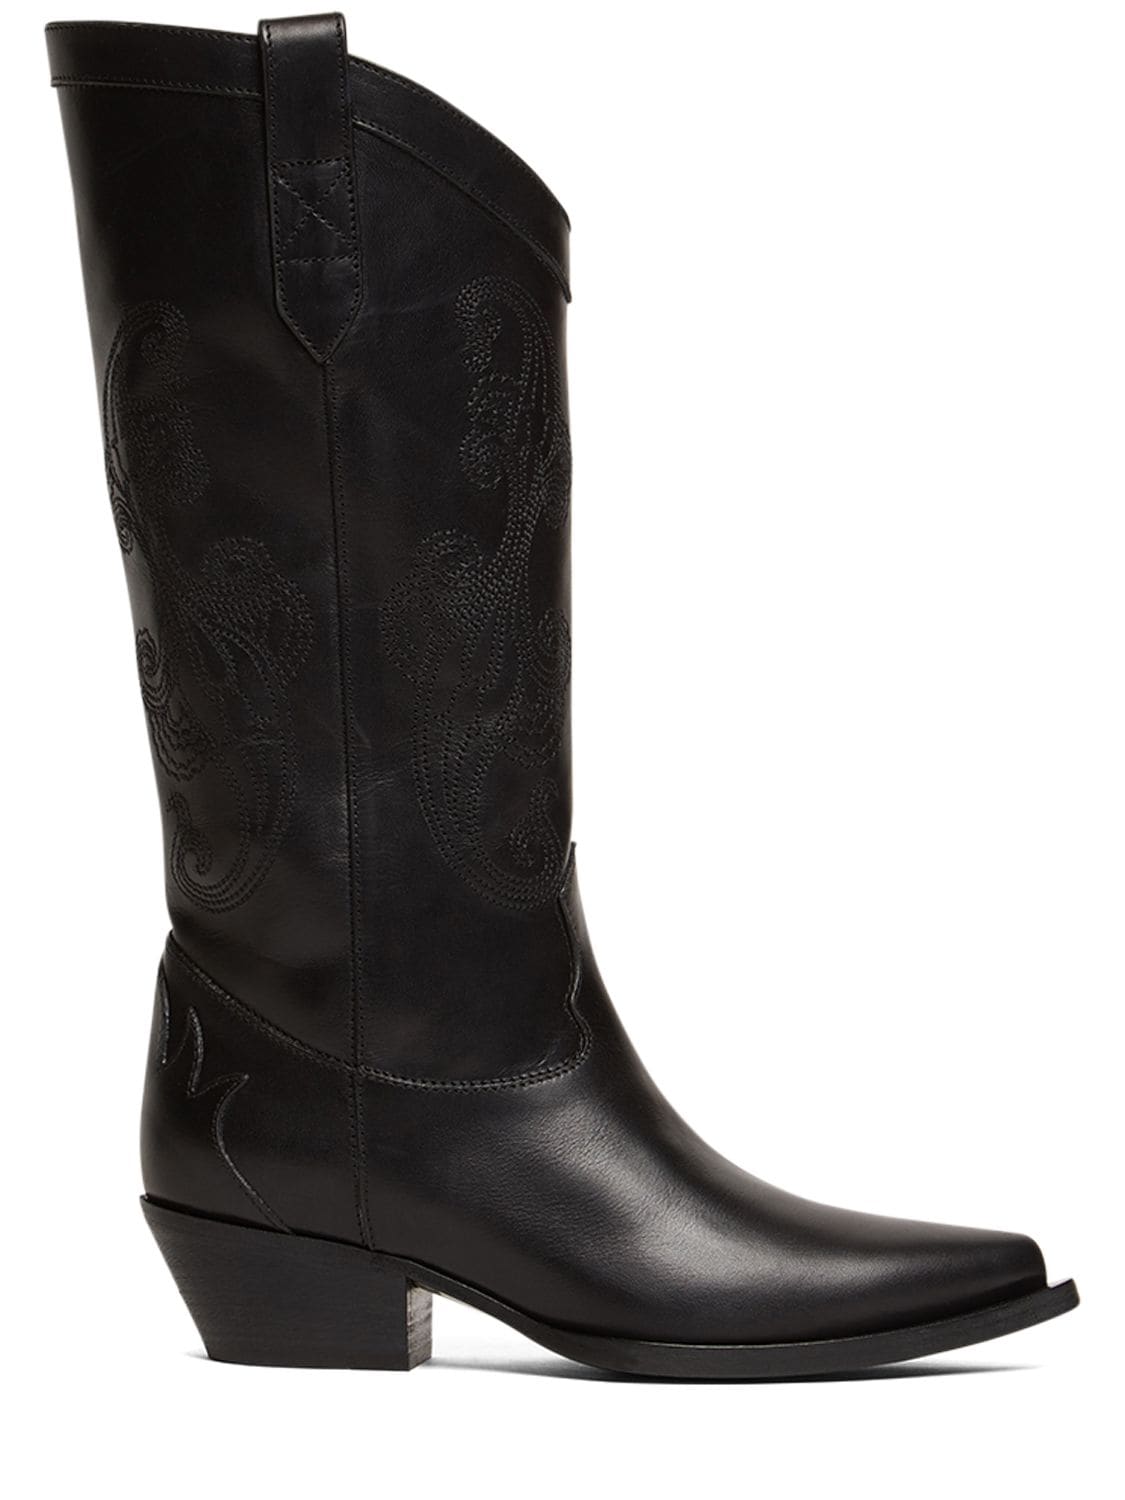 40mm Western Leather Tall Boots